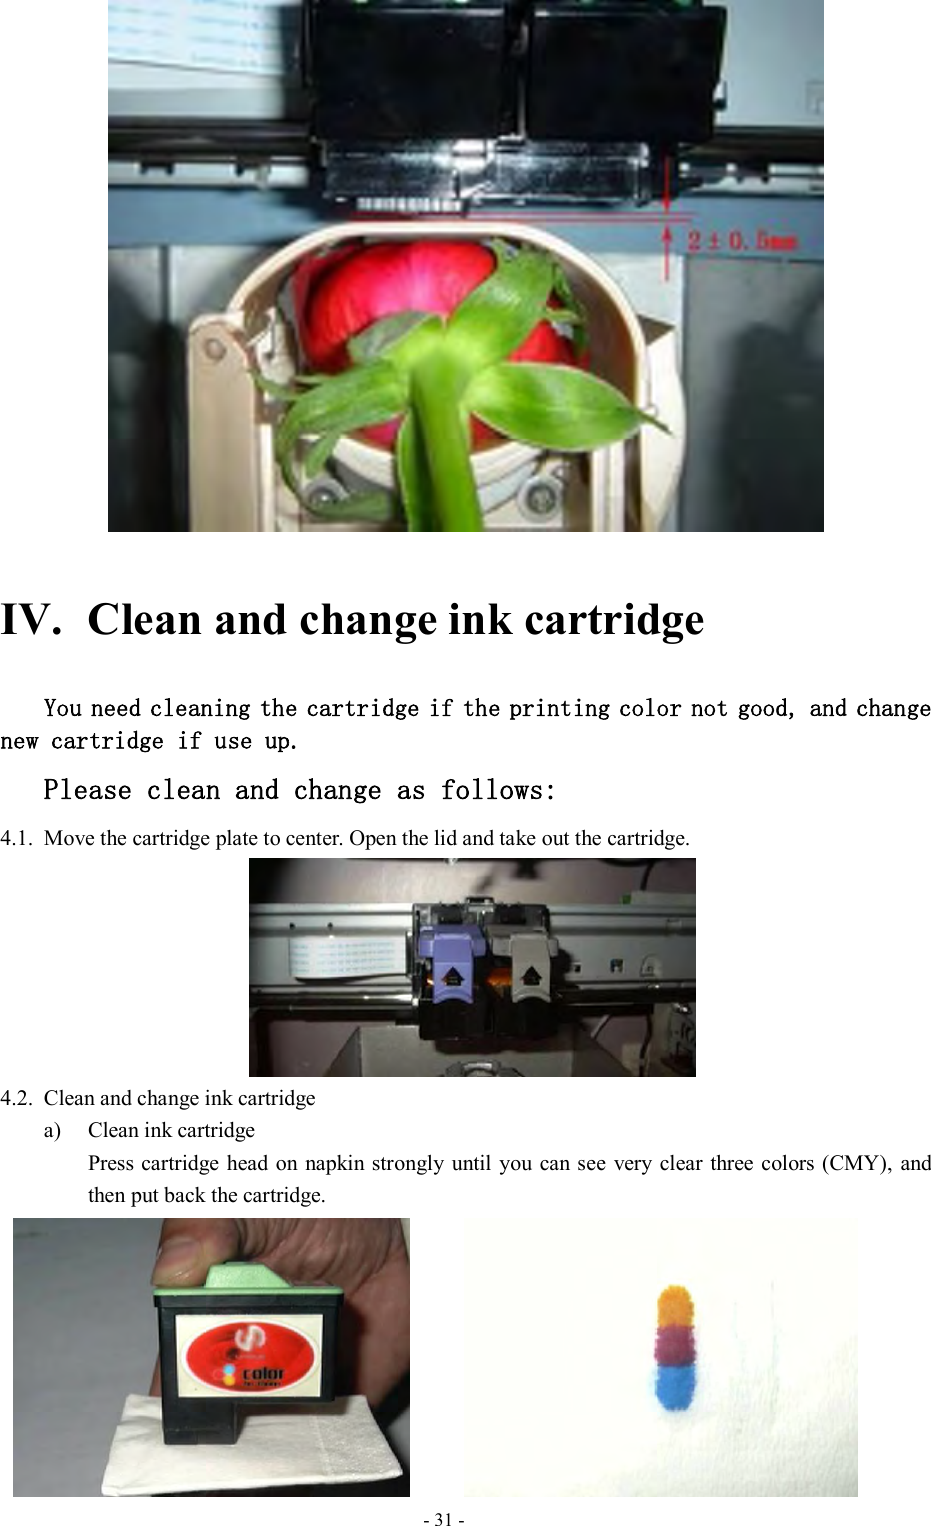  - 31 -  IV. Clean and change ink cartridge You need cleaning the cartridge if the printing color not good, and change new cartridge if use up.  Please clean and change as follows: 4.1. Move the cartridge plate to center. Open the lid and take out the cartridge.    4.2. Clean and change ink cartridge a) Clean ink cartridge   Press cartridge  head on napkin strongly  until you  can see very clear three colors (CMY),  and then put back the cartridge.                      